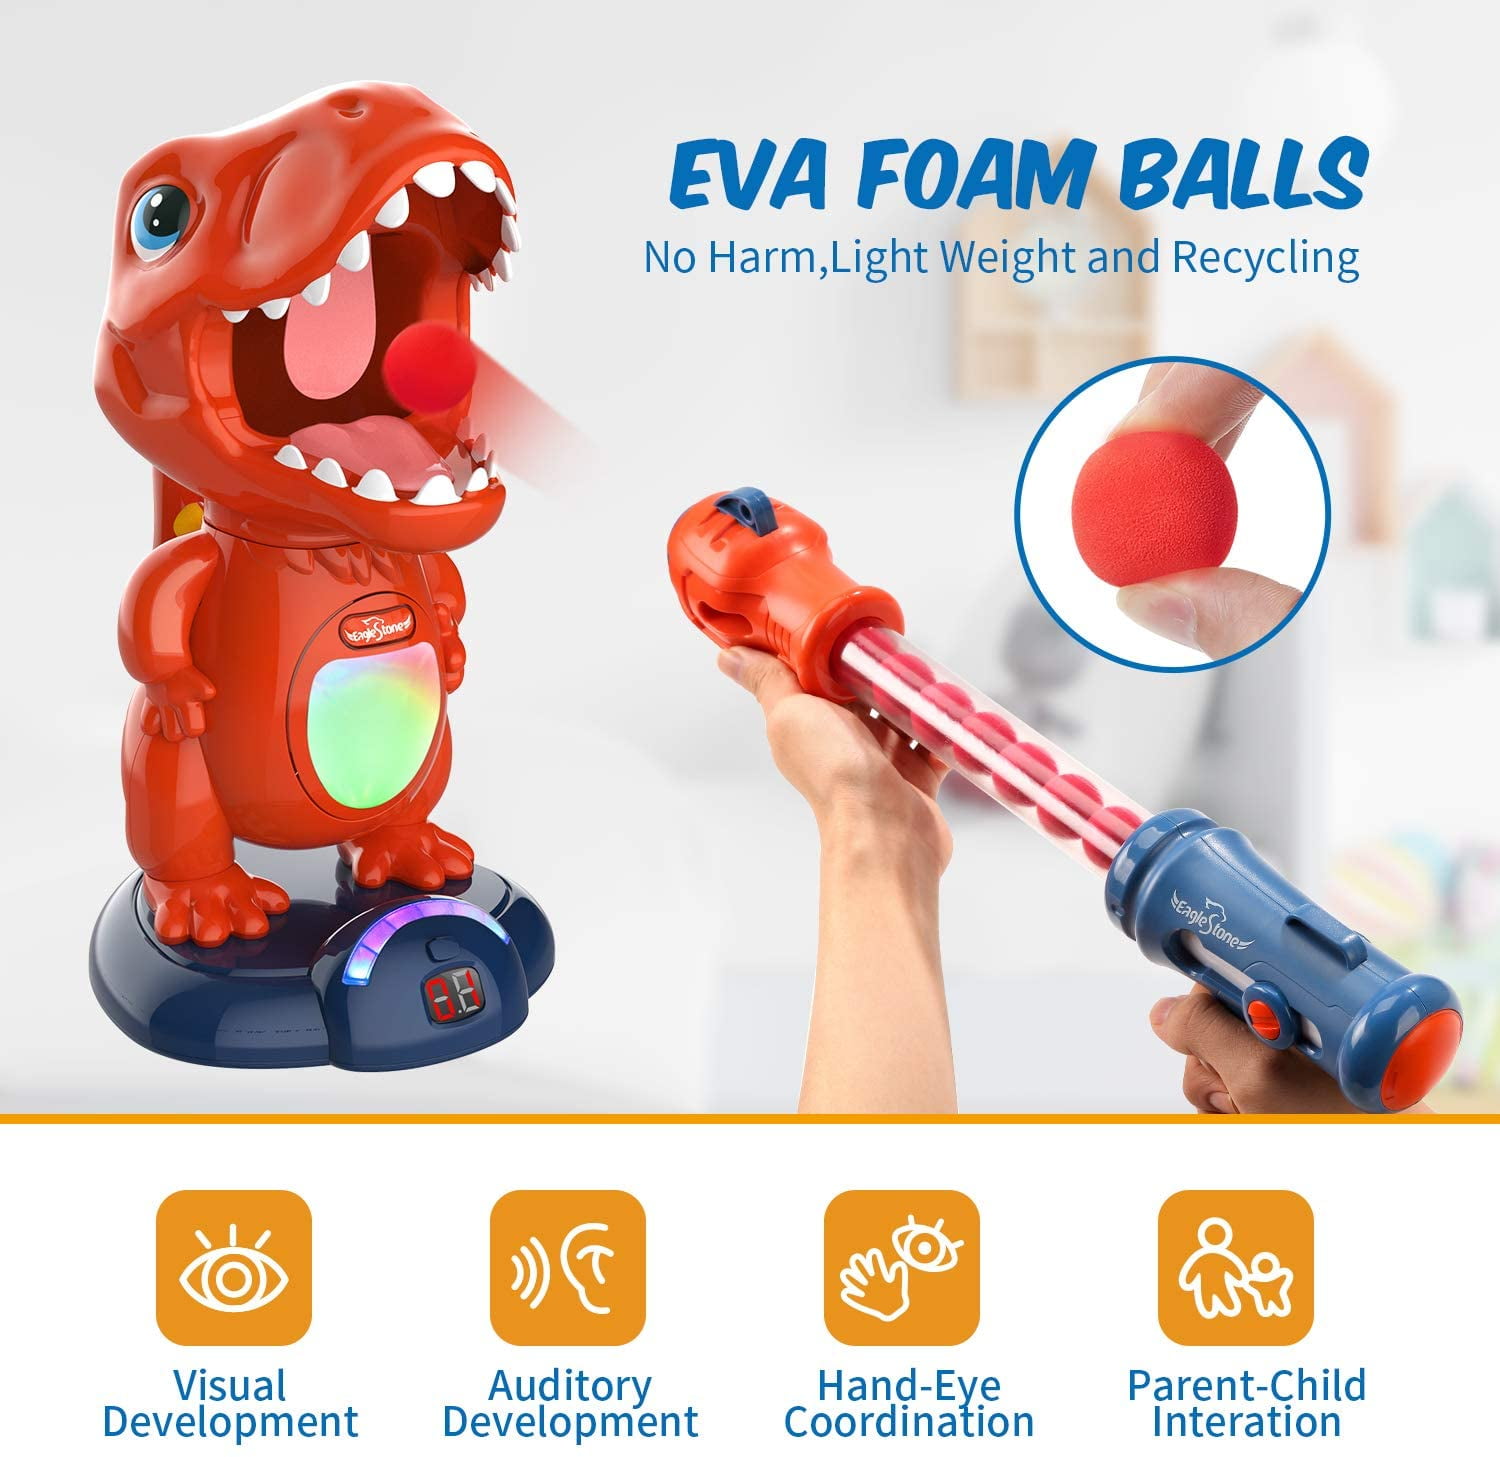  Dinosaur Toys Shooting Games for Kids Shooting Toys Target  Practice with LCD Score Record and 24 Foam Balls,Air Balls Shooting Foam  Ball Game for Boys Girls and Adult Ideal Gifts Toys